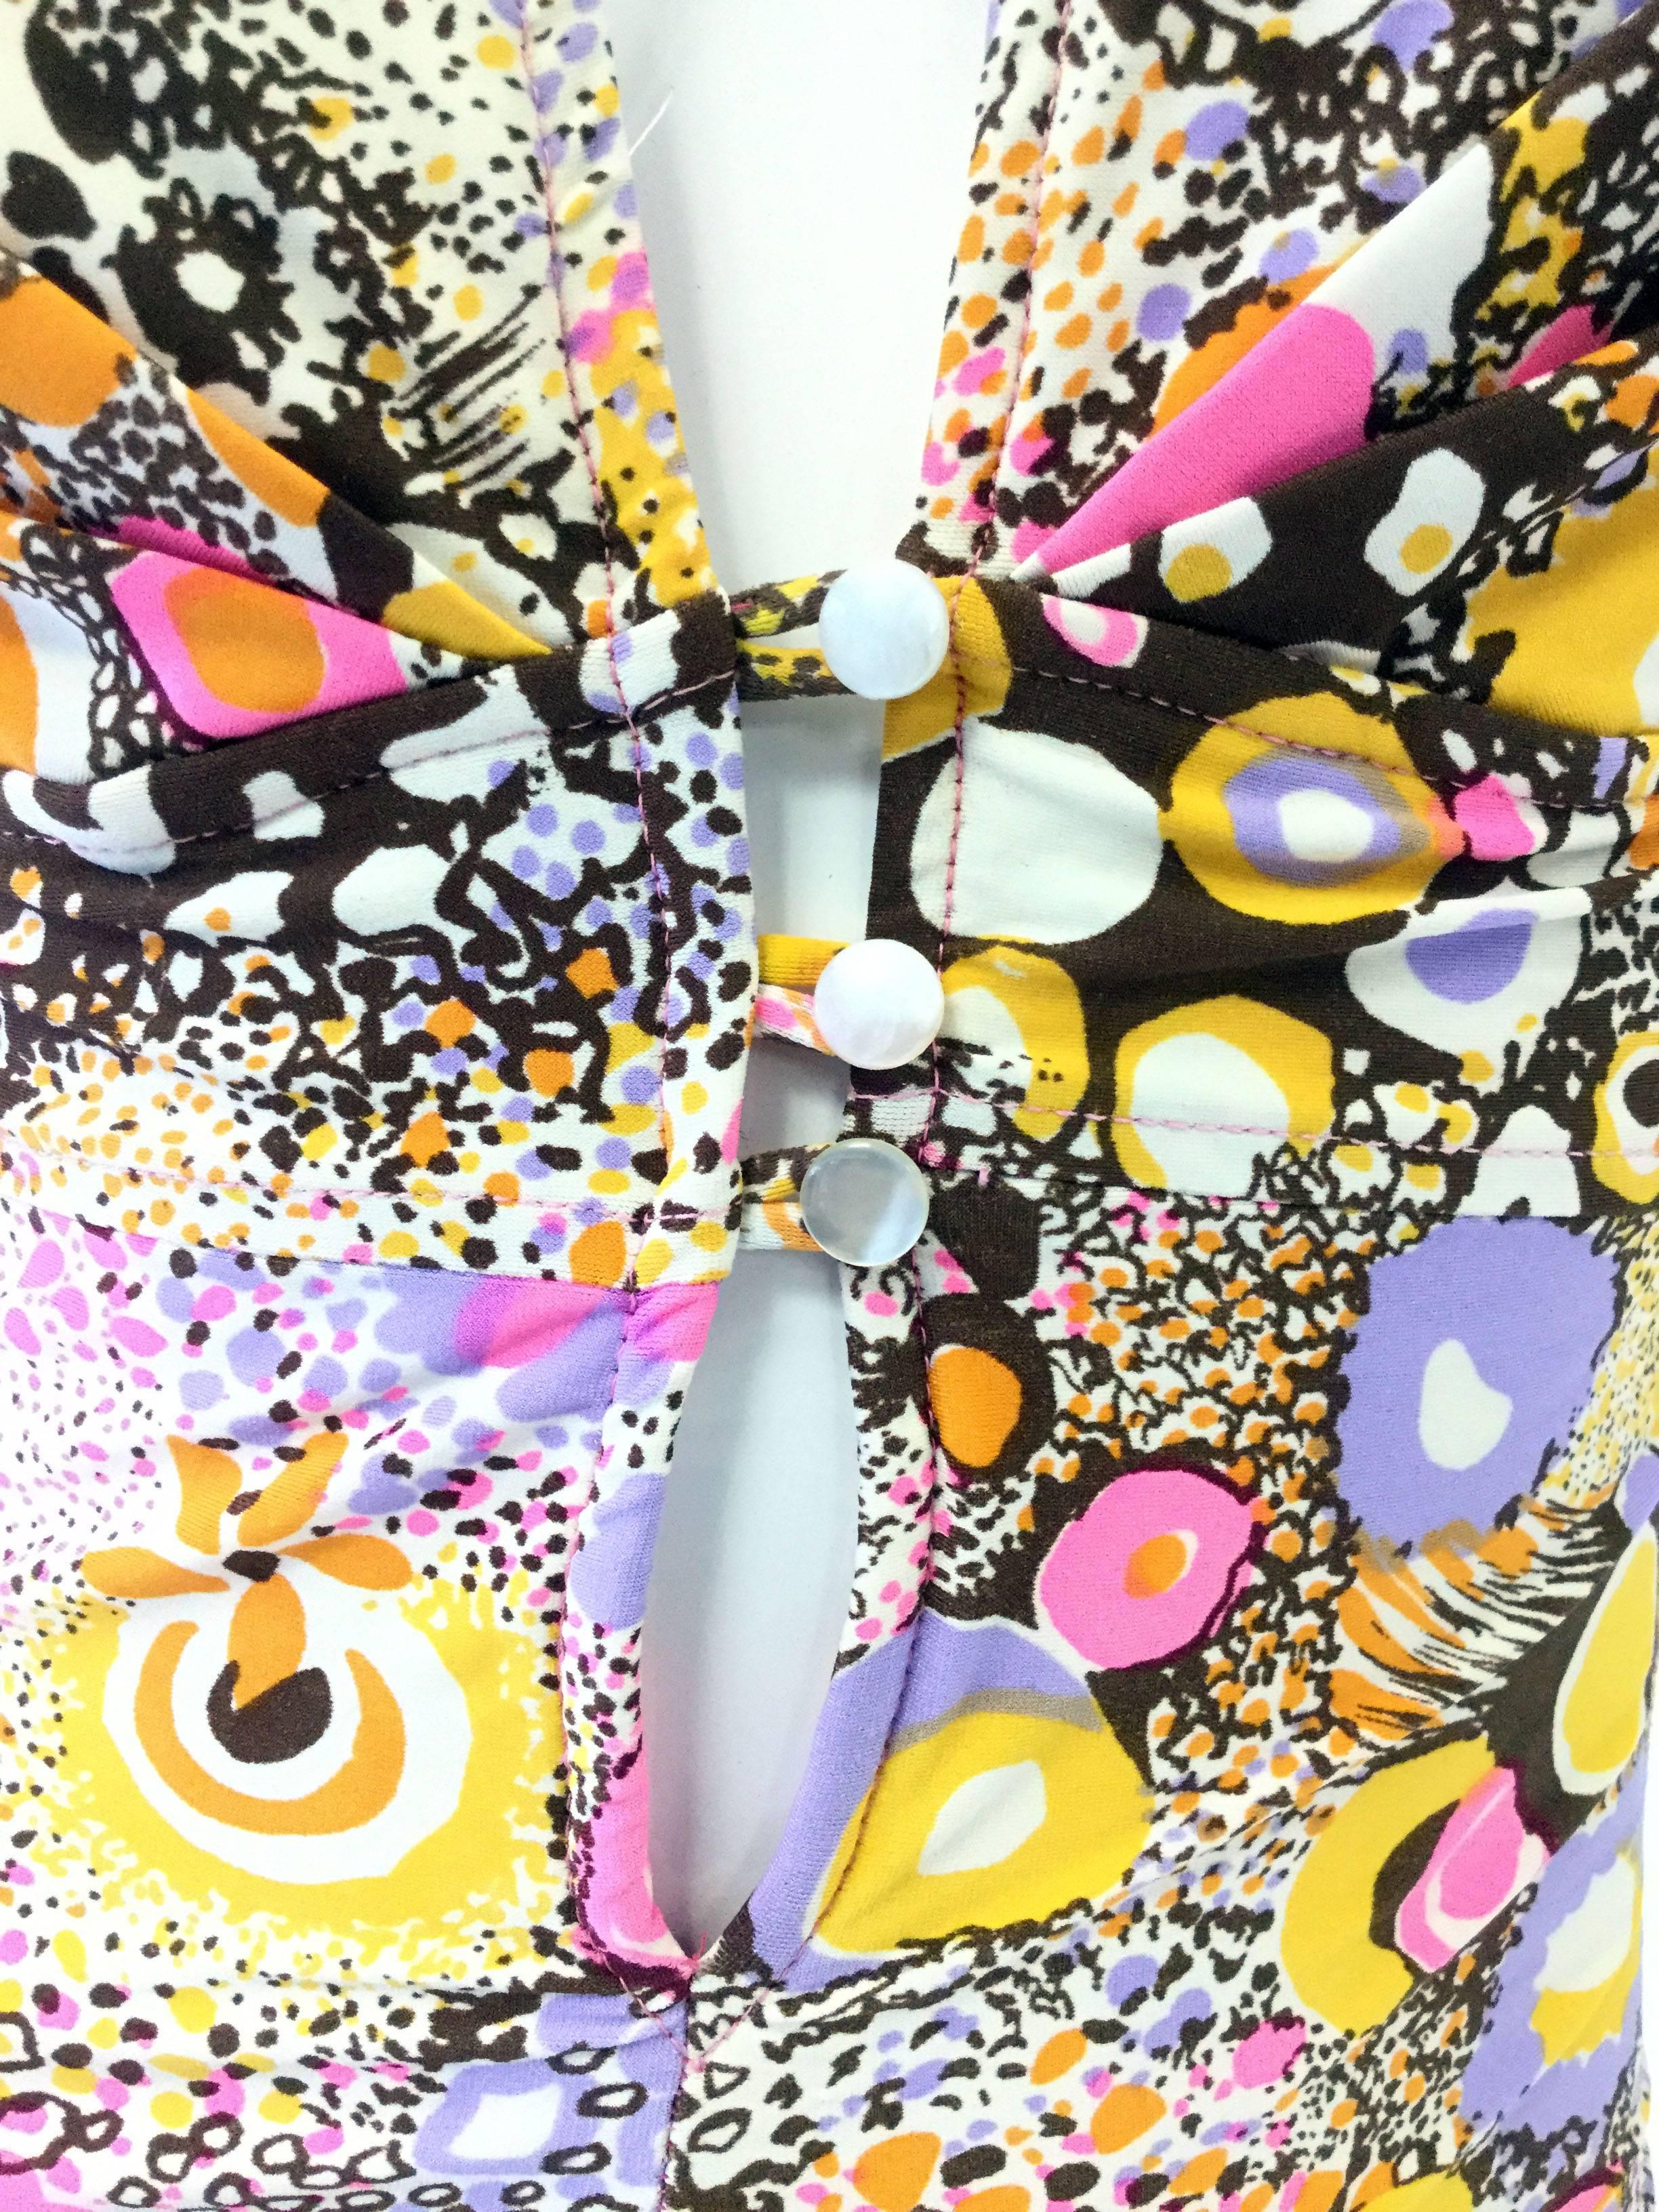 
This fantastic one-piece swimsuit by Jantzen features an eye-popping optical art print consisting of colorful abstract floral and animal print shapes that recall the psychedelic liquid light shows of the 1970s. This yellow, purple, pink, violet,